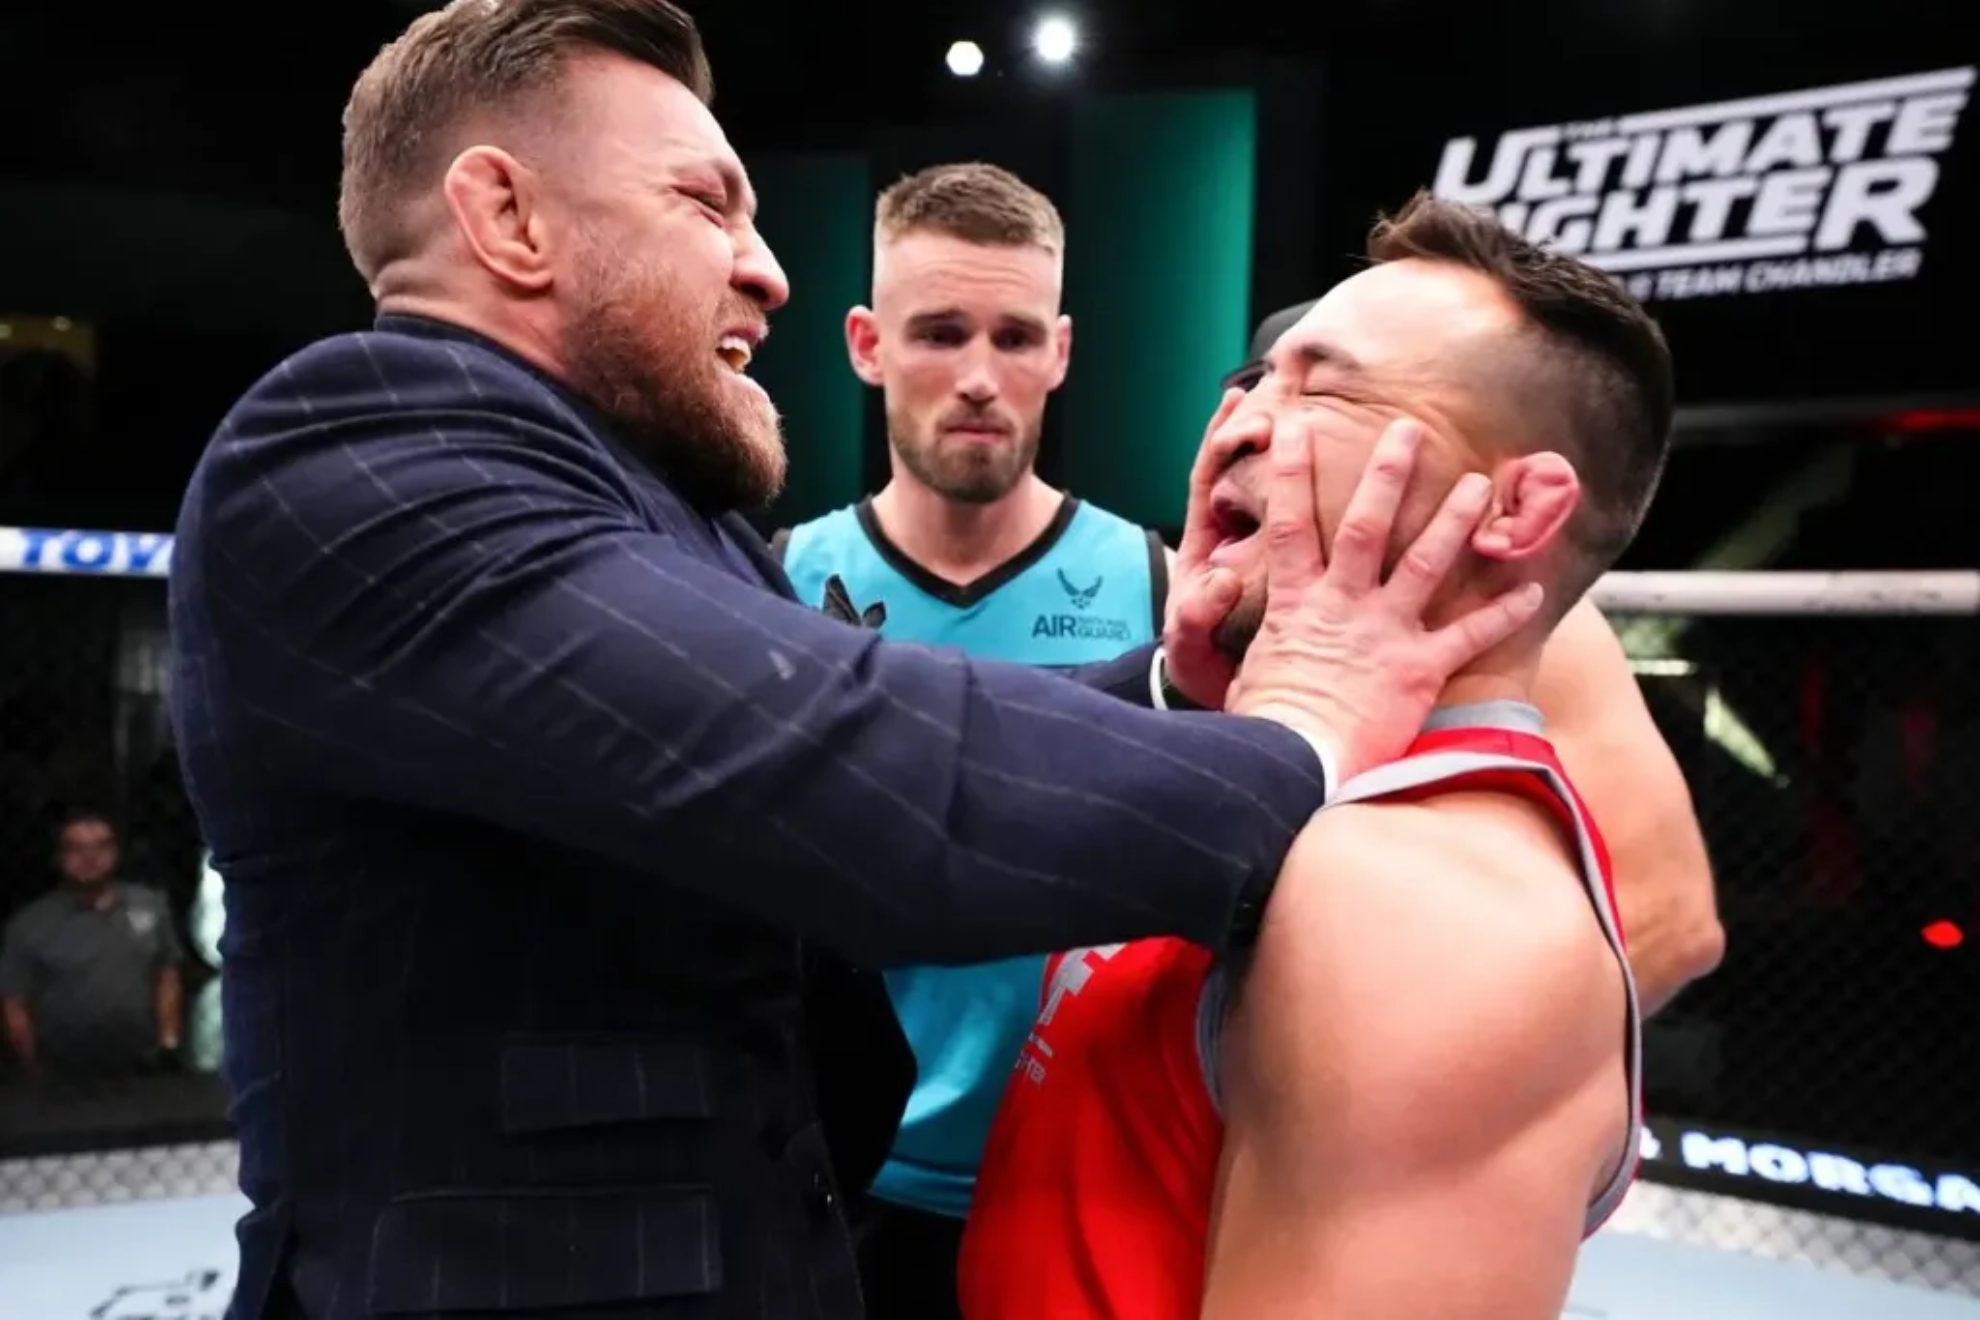 Conor McGregor shoves Michael Chandler at The Ultimate Fighter show